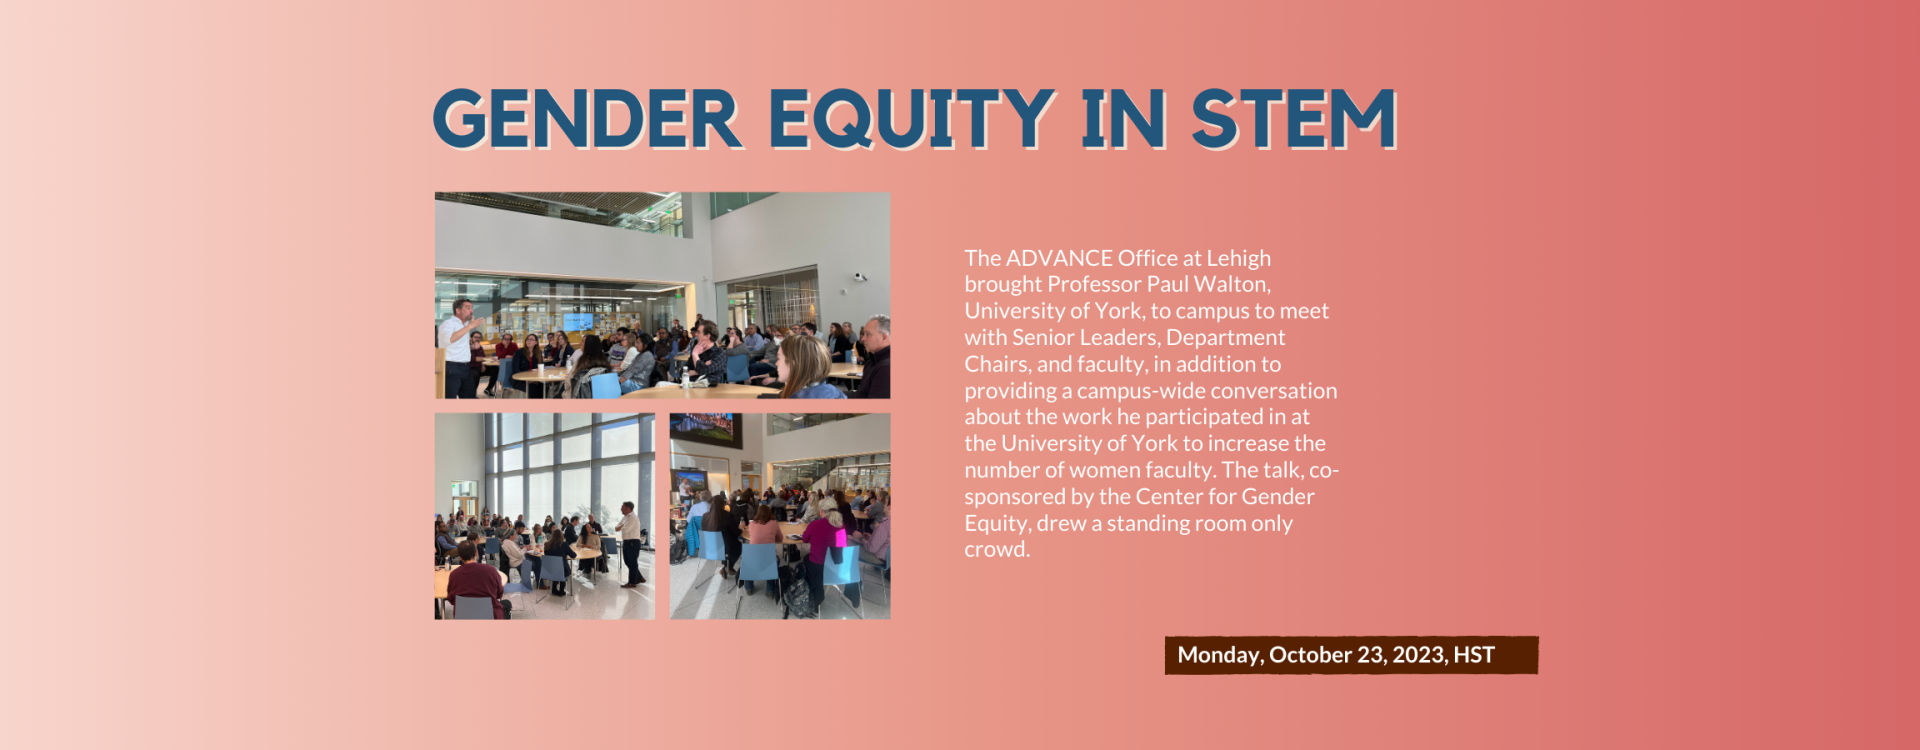 Gender Equity In STEM: The ADVANCE Office at Lehigh brought Professor Paul Walton, University of York, to campus to meet with Senior Leaders, Department Chairs, and faculty, in addition to providing a campus-wide conversation about the work he participated in at the University of York to increase the number of women faculty. The talk, co-sponsored by the Center for Gender Equity, drew a standing room only crowd.